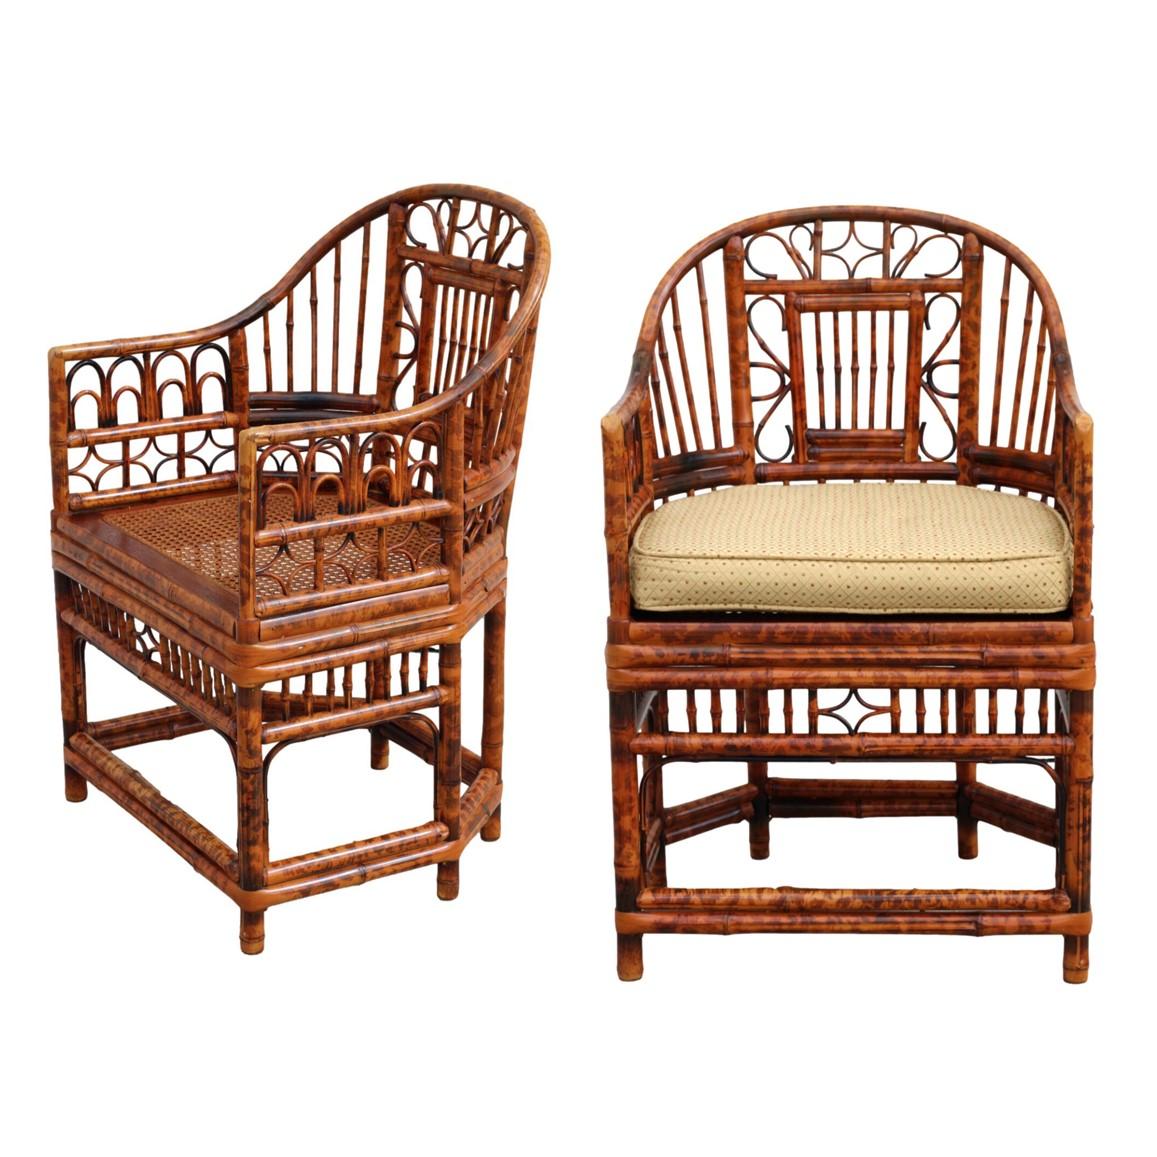 Stunning pair of burnt bamboo armchairs with gracefully shaped horseshoe frames, in the Brighton Pavilion style. These Chinese Chippendale chairs feature a beautiful tortoiseshell finish, caned-bottom seats, and intricate bamboo open fretwork. Loose